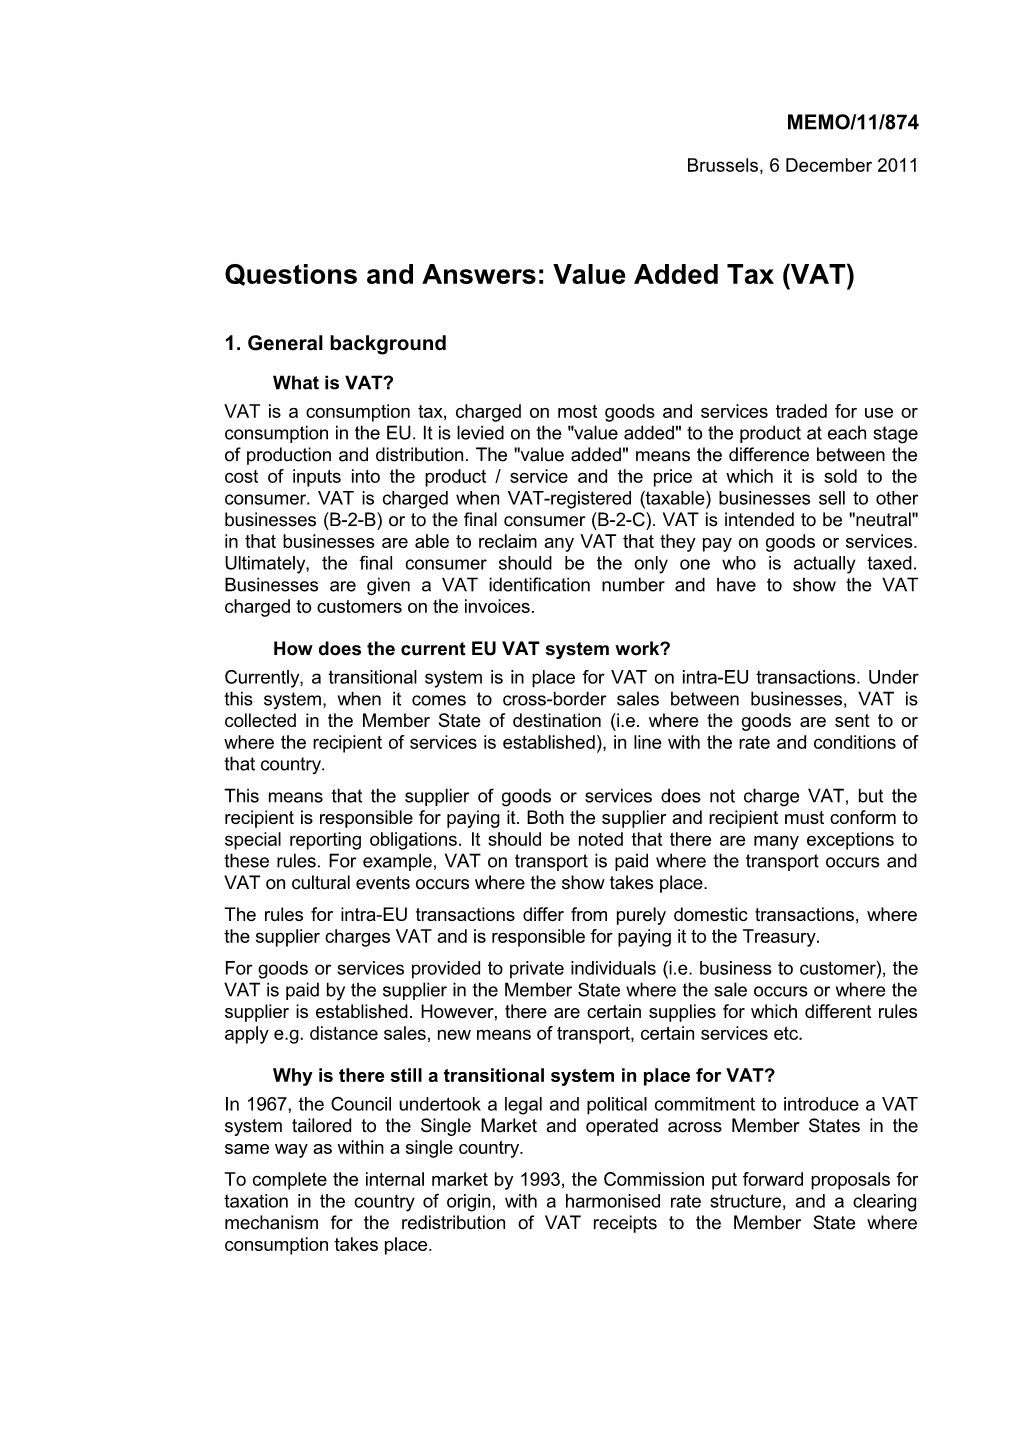 Questions and Answers: Value Added Tax (VAT)